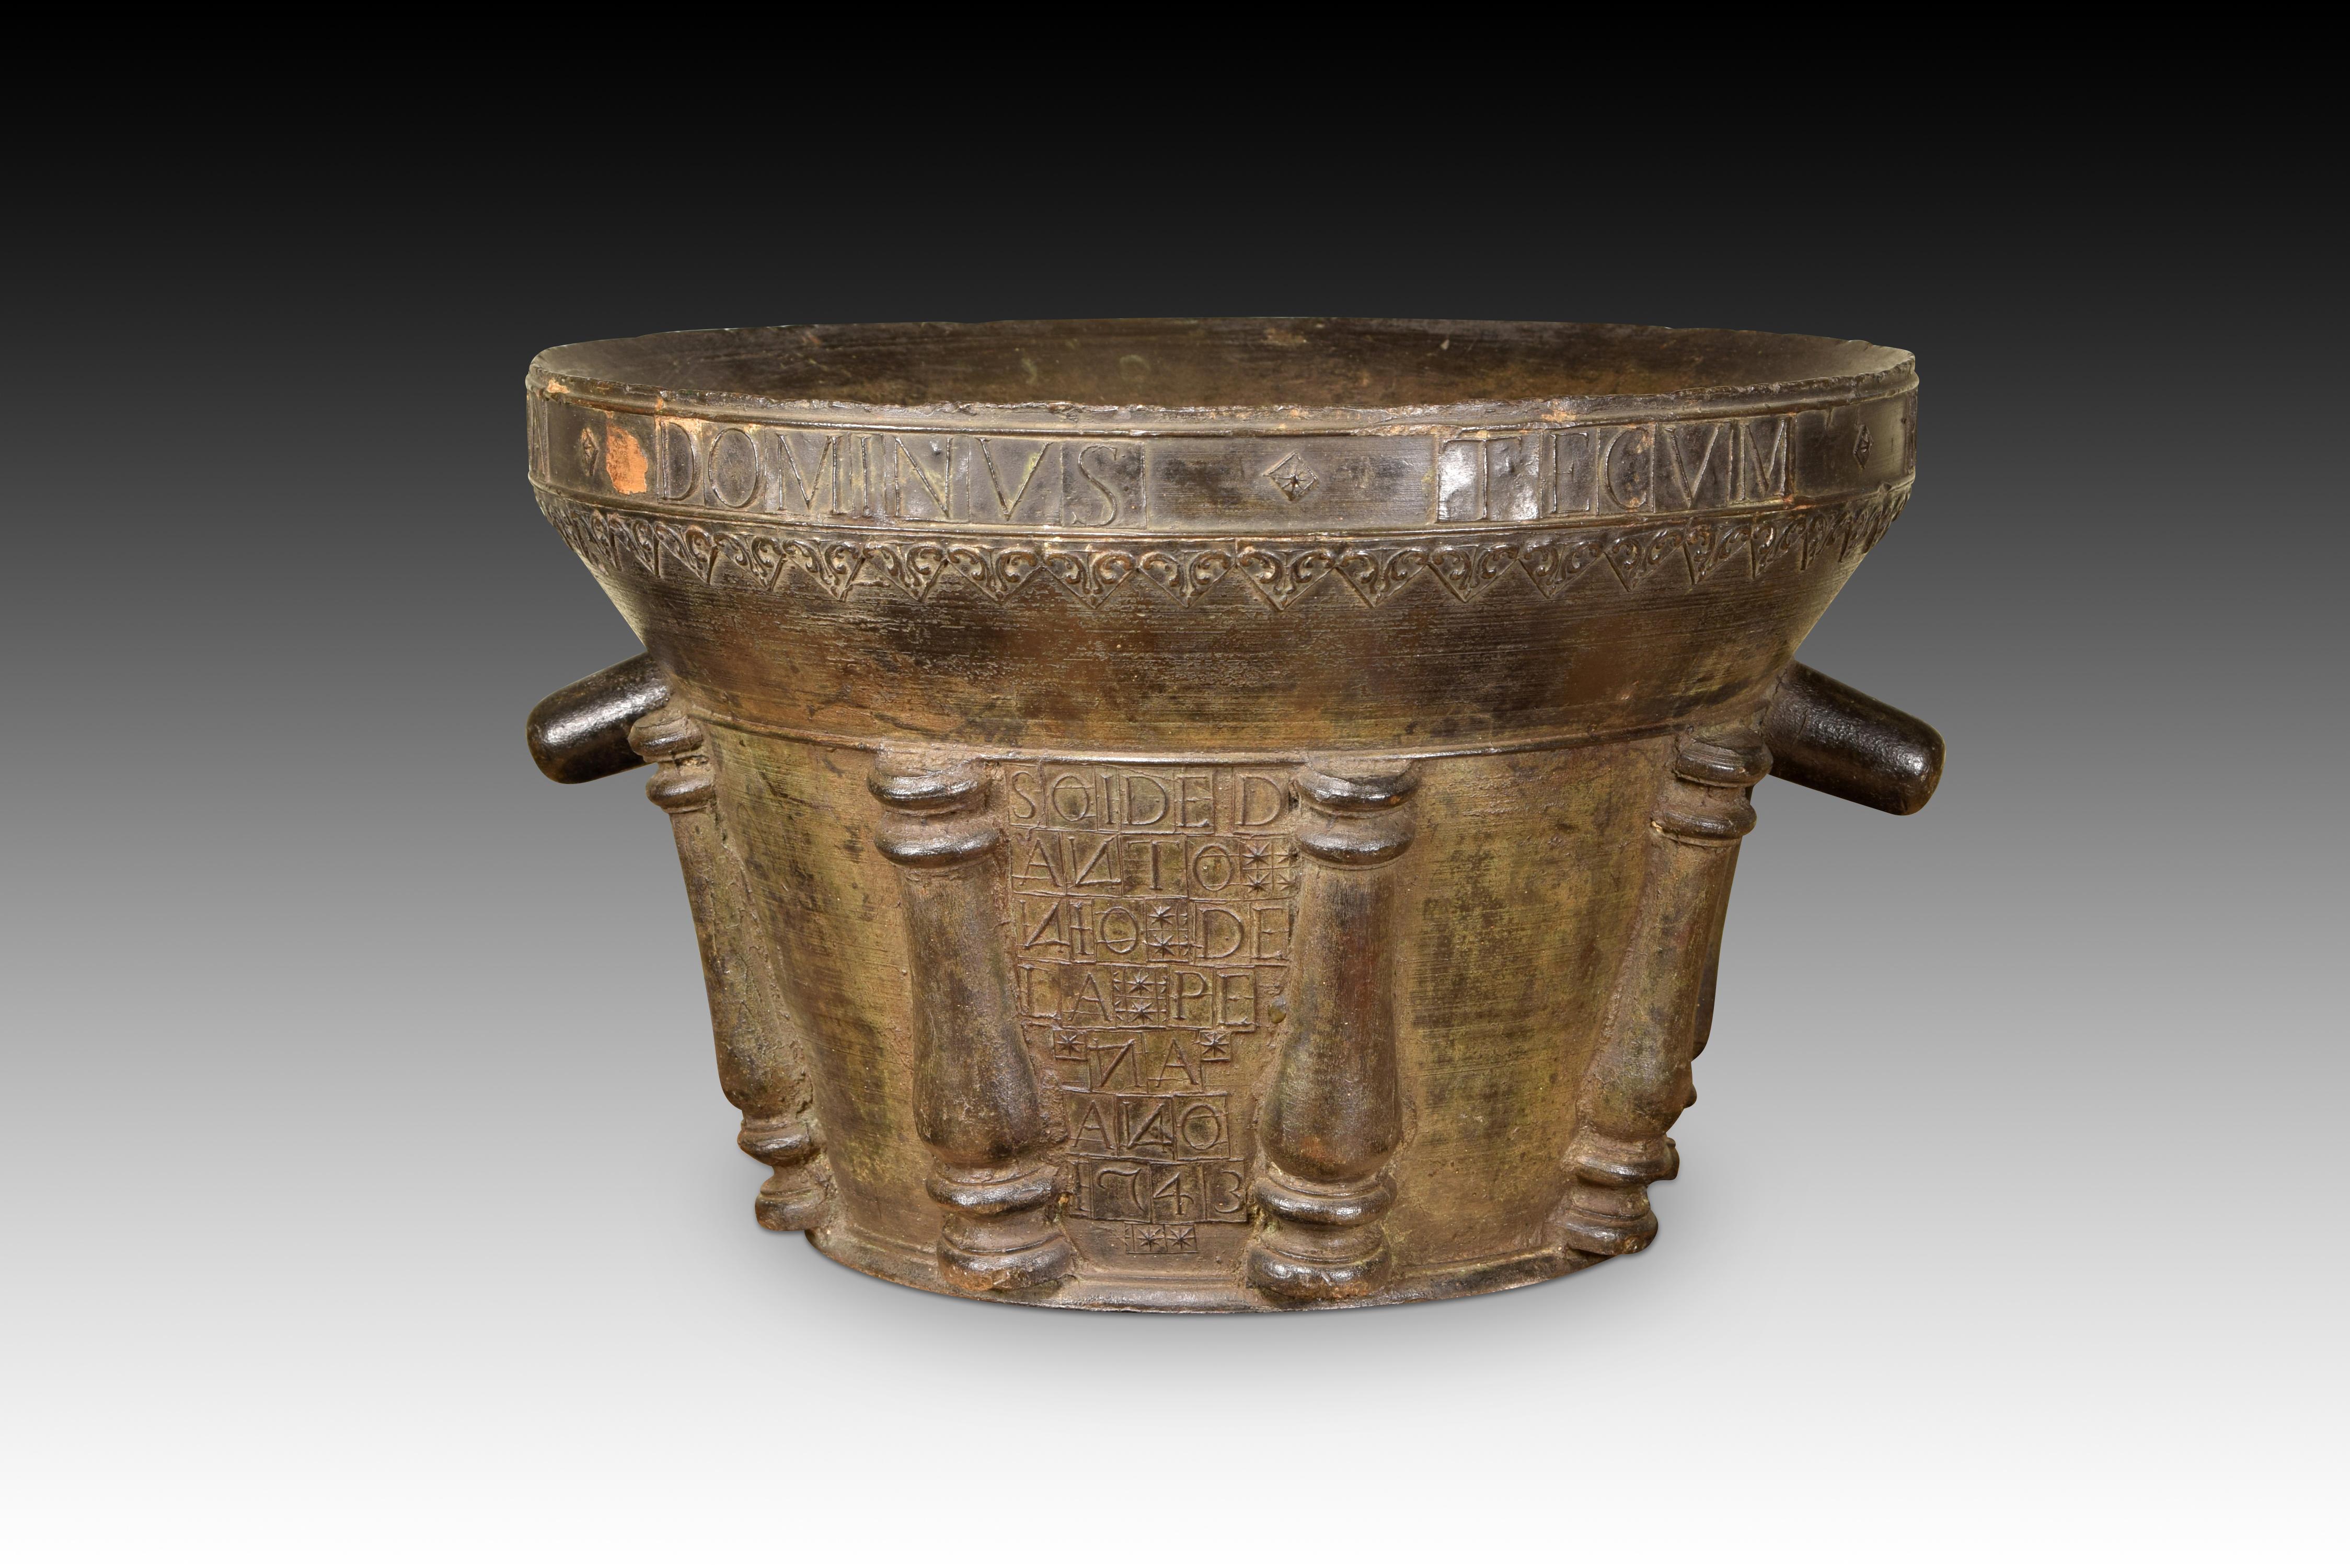 Spanish Pharmacy mortar. Bronze. Spain, dated in the piece in 1743. 